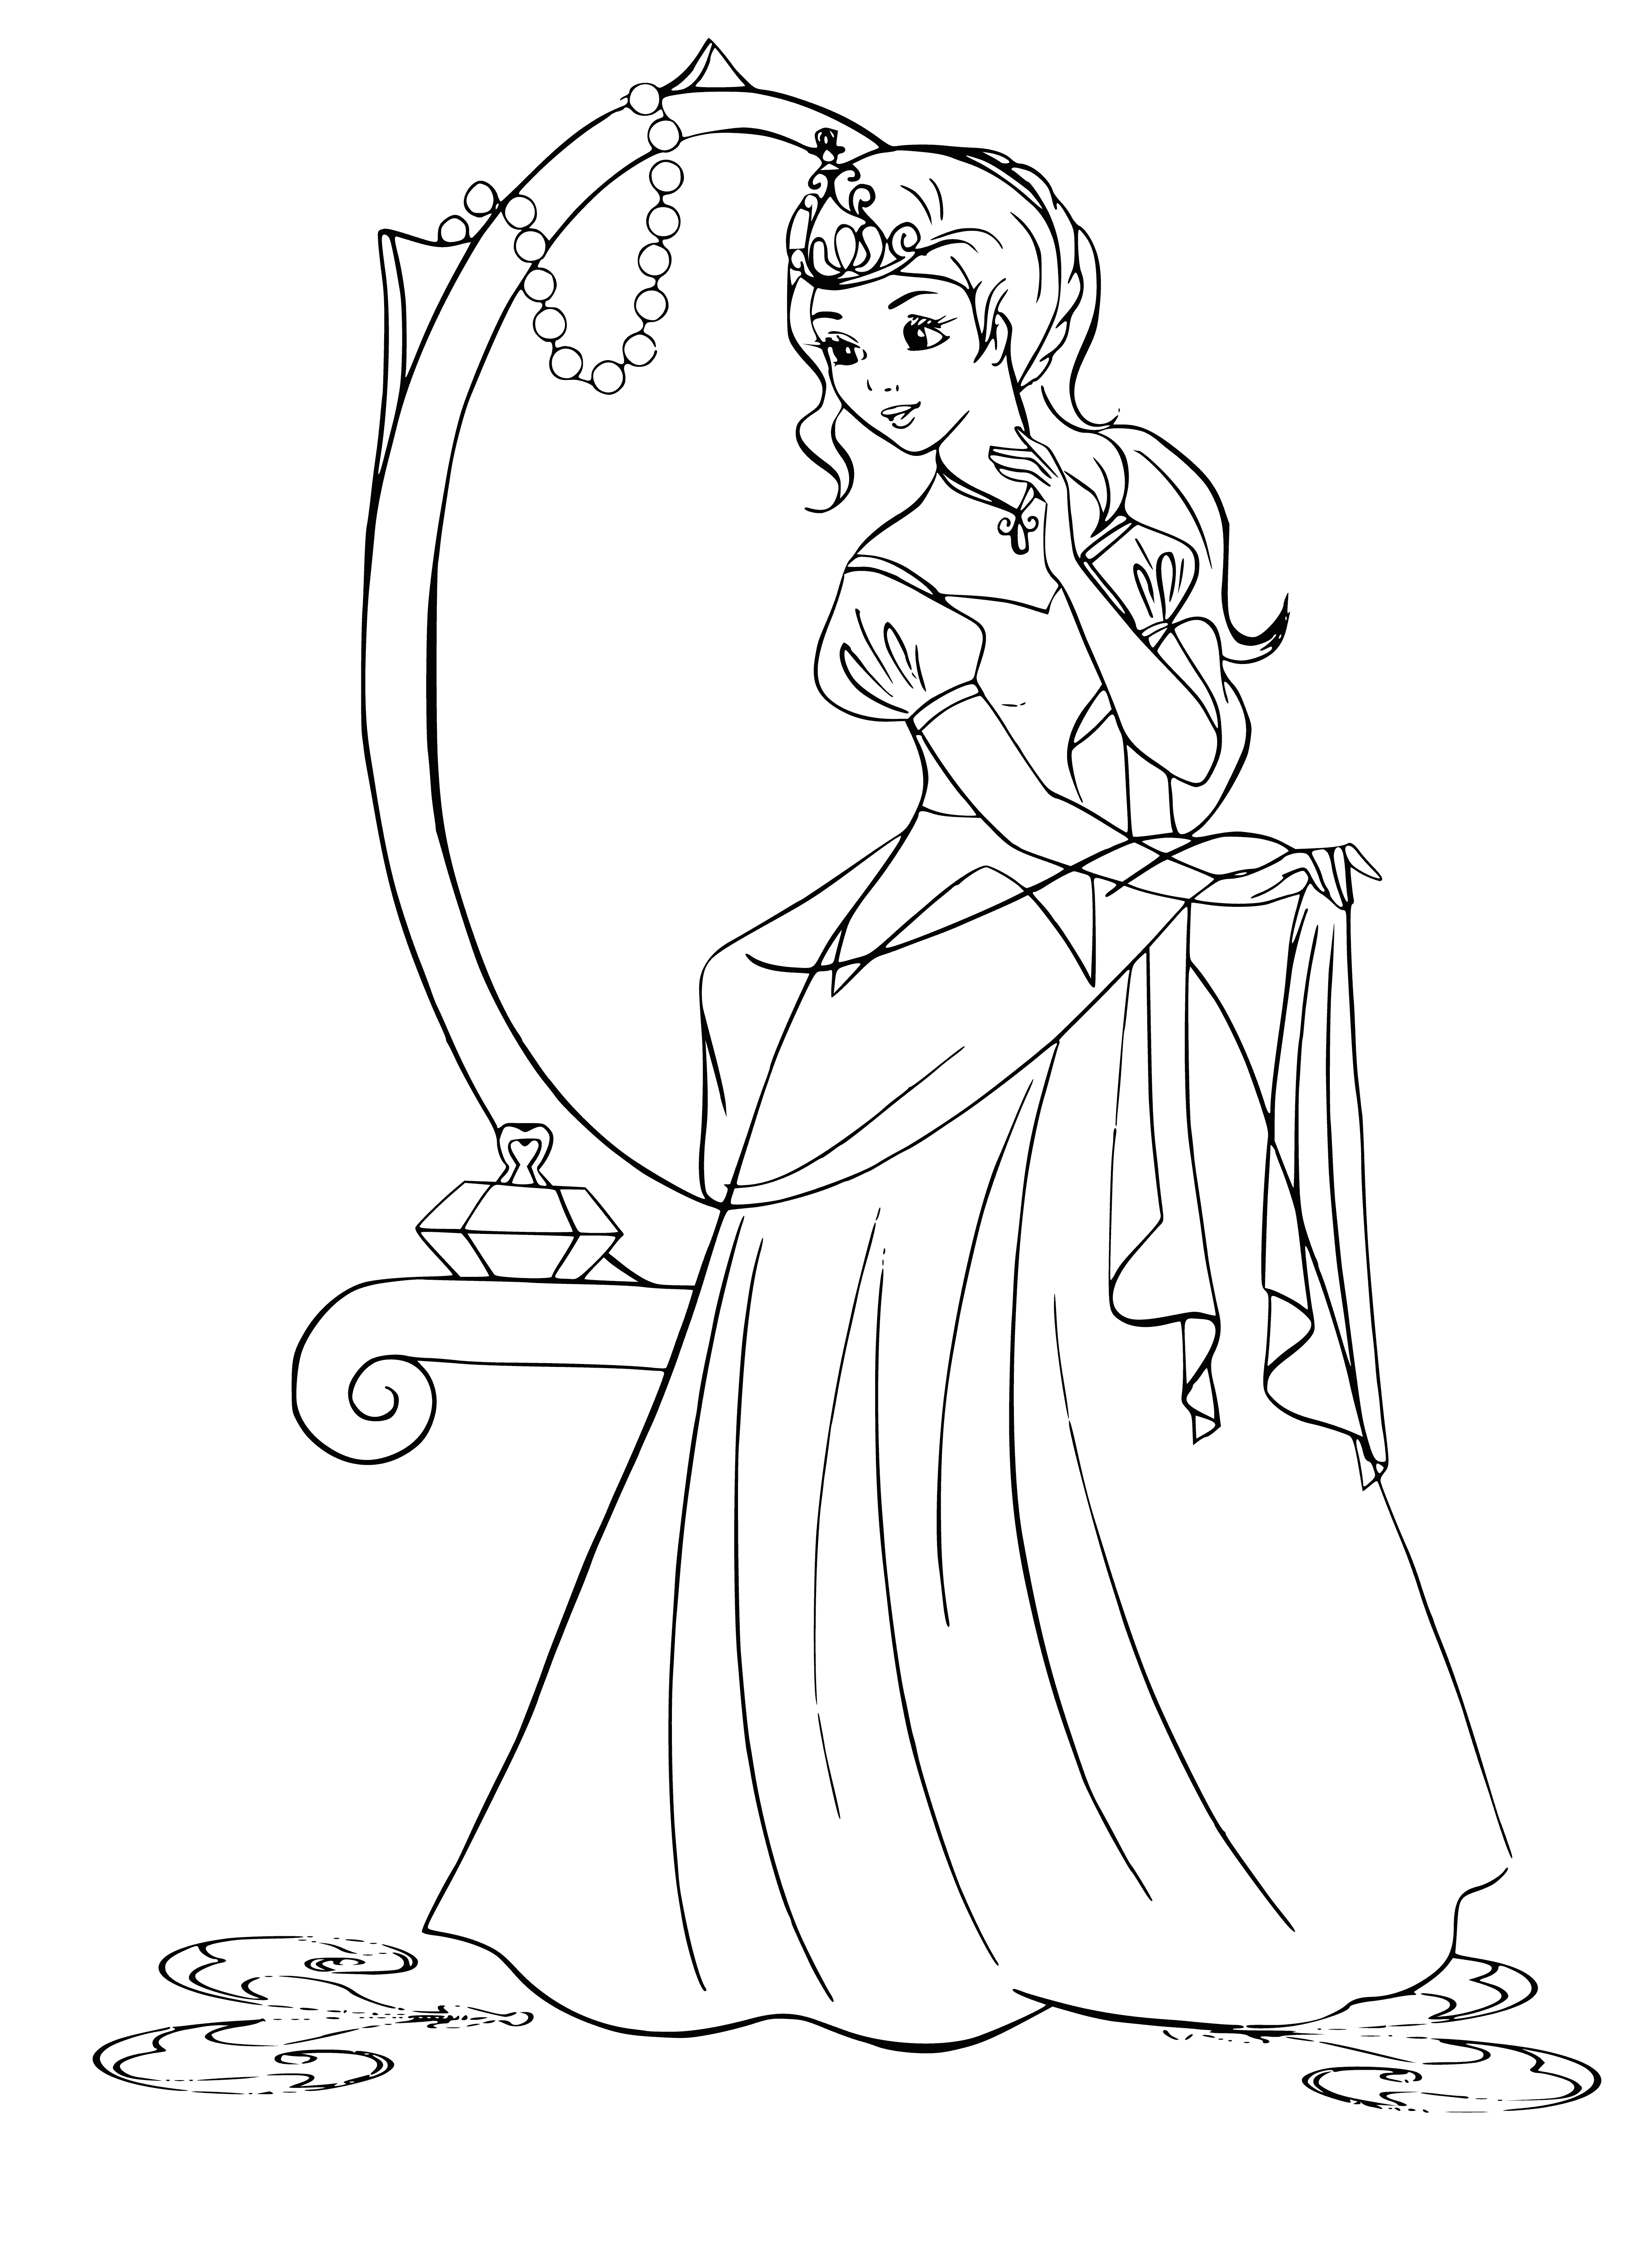 coloring page: Princess admires her beautiful gown and tiara, feeling excited and happy.